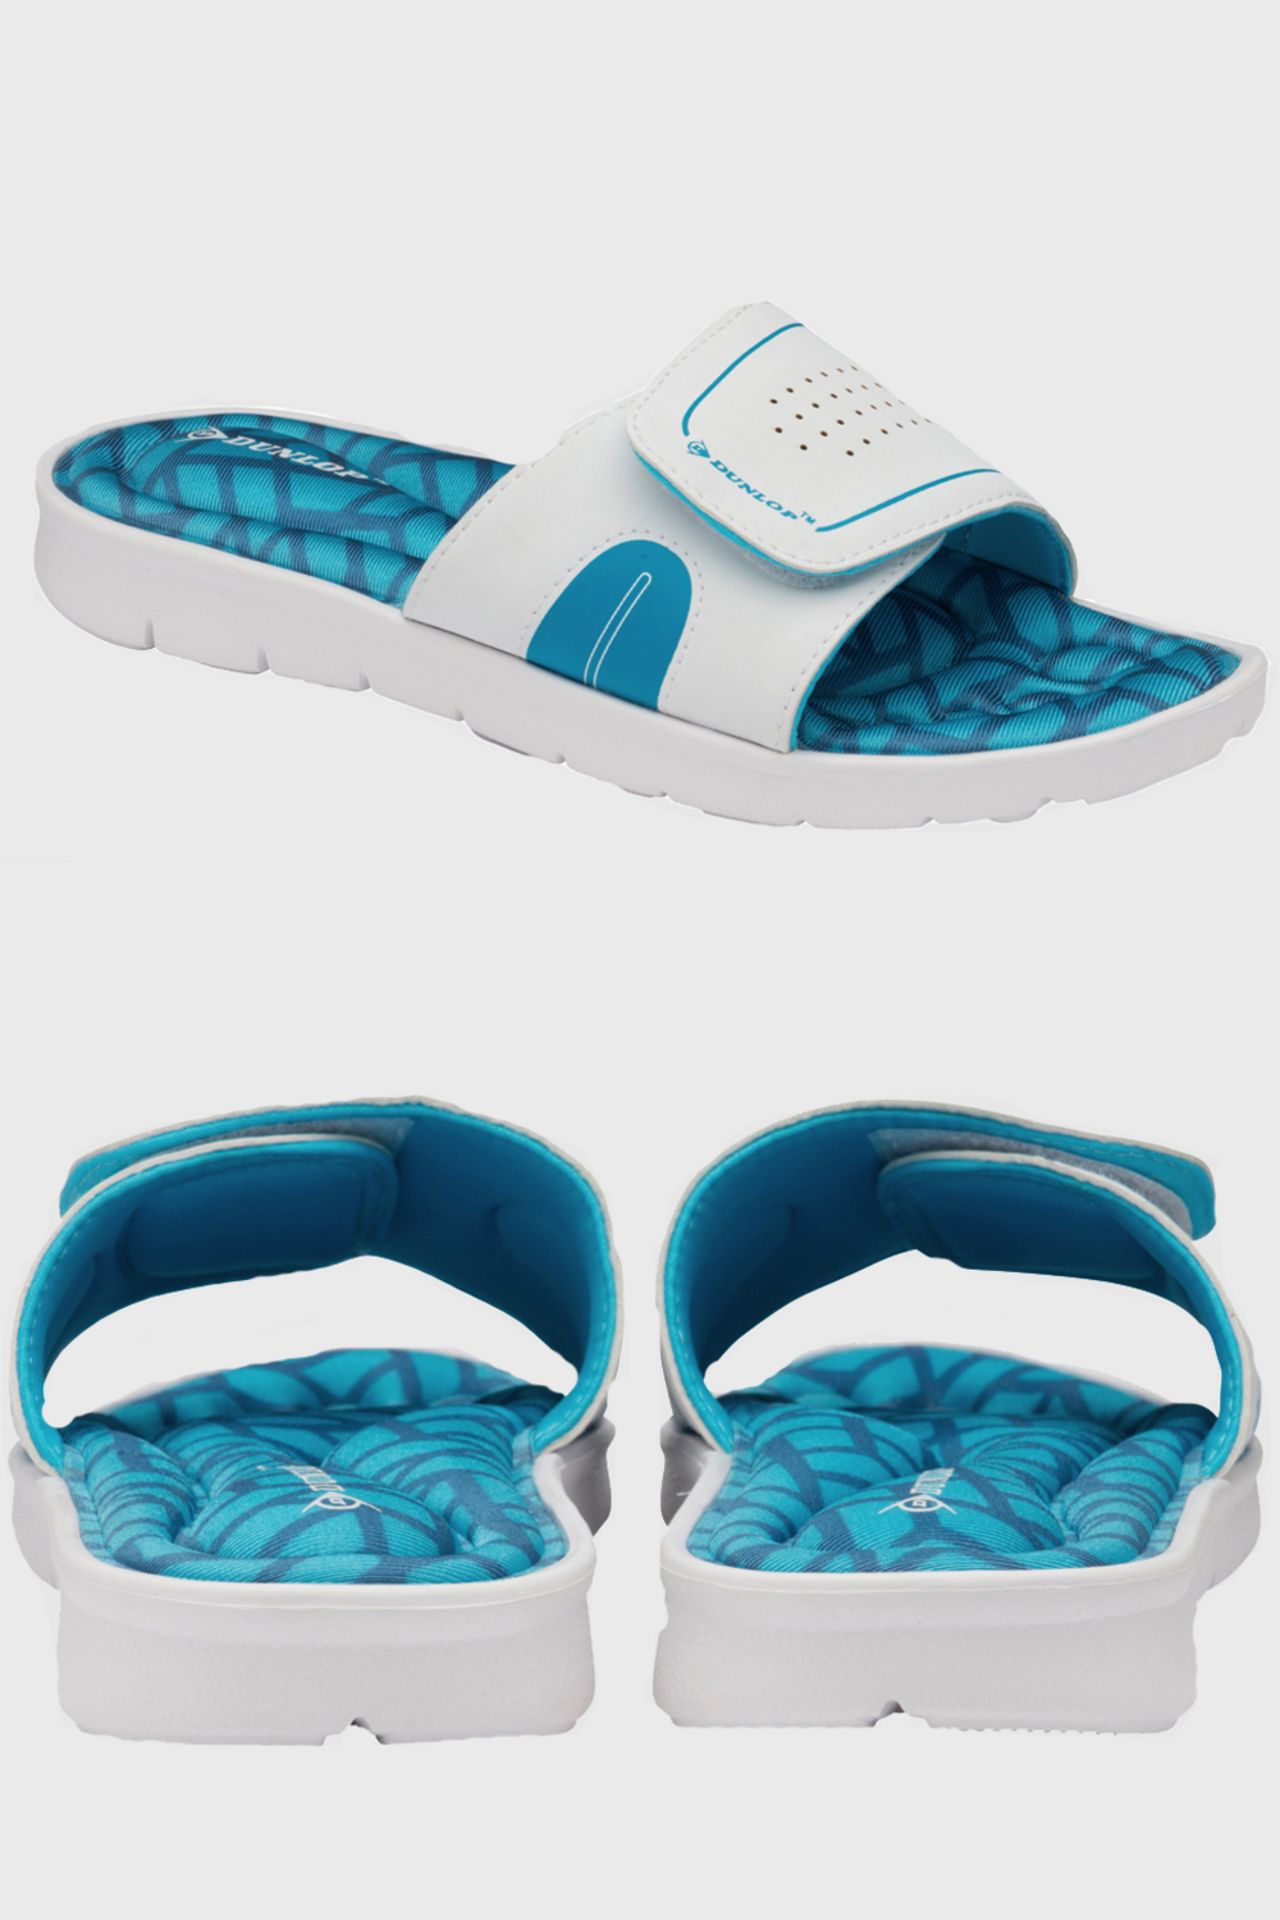 12 X BRAND NEW DUNLOP ADJUSTABLE STRAP MEMORY FOAM SLIDERS IN BLUE AND WHITE ALL IN MIXED SIZES TO - Image 2 of 3